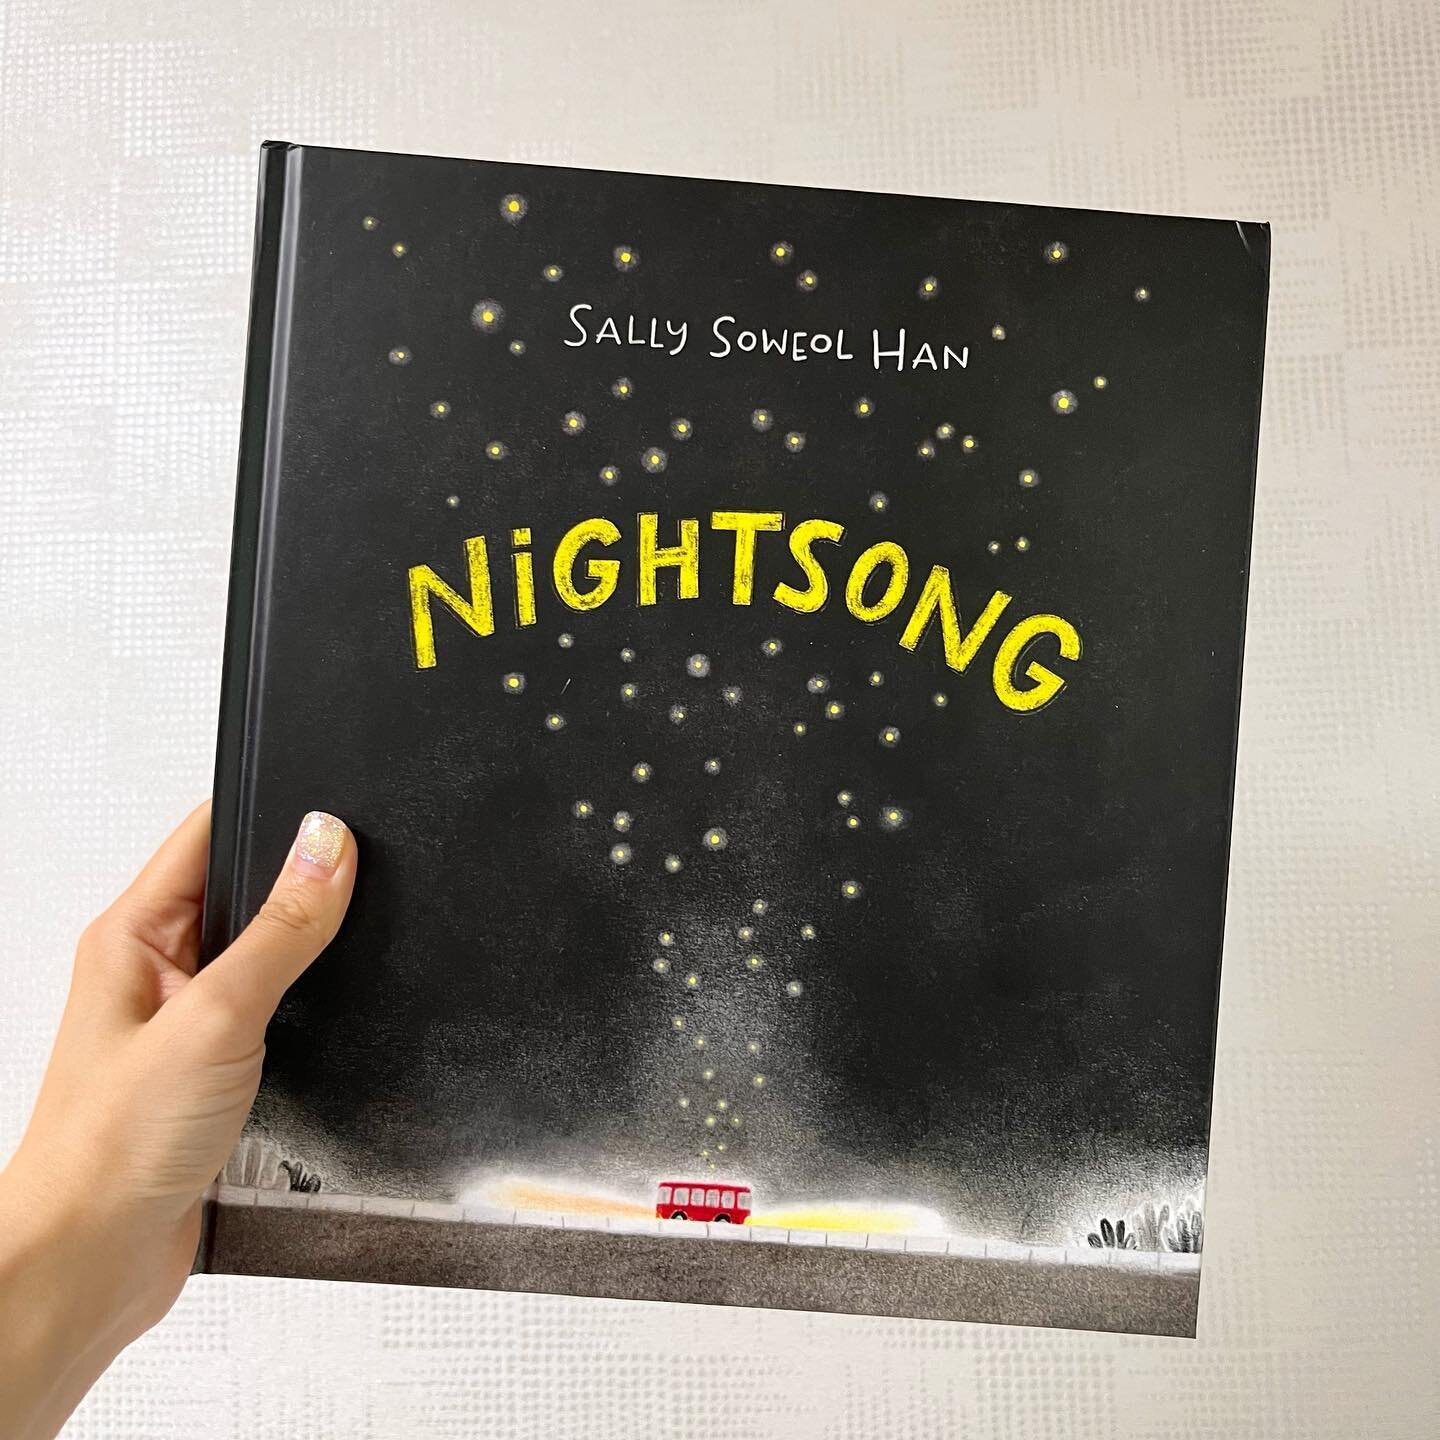 NIGHTSONG is out in the world today! Hooray!🎉🎉🎉

It captures‭&nbsp;the&nbsp;joyous&nbsp;experience&nbsp;of a child appreciating the wonders of nature that can only be seen and heard at night. Listen carefully to the wonder of nocturnal melodies an